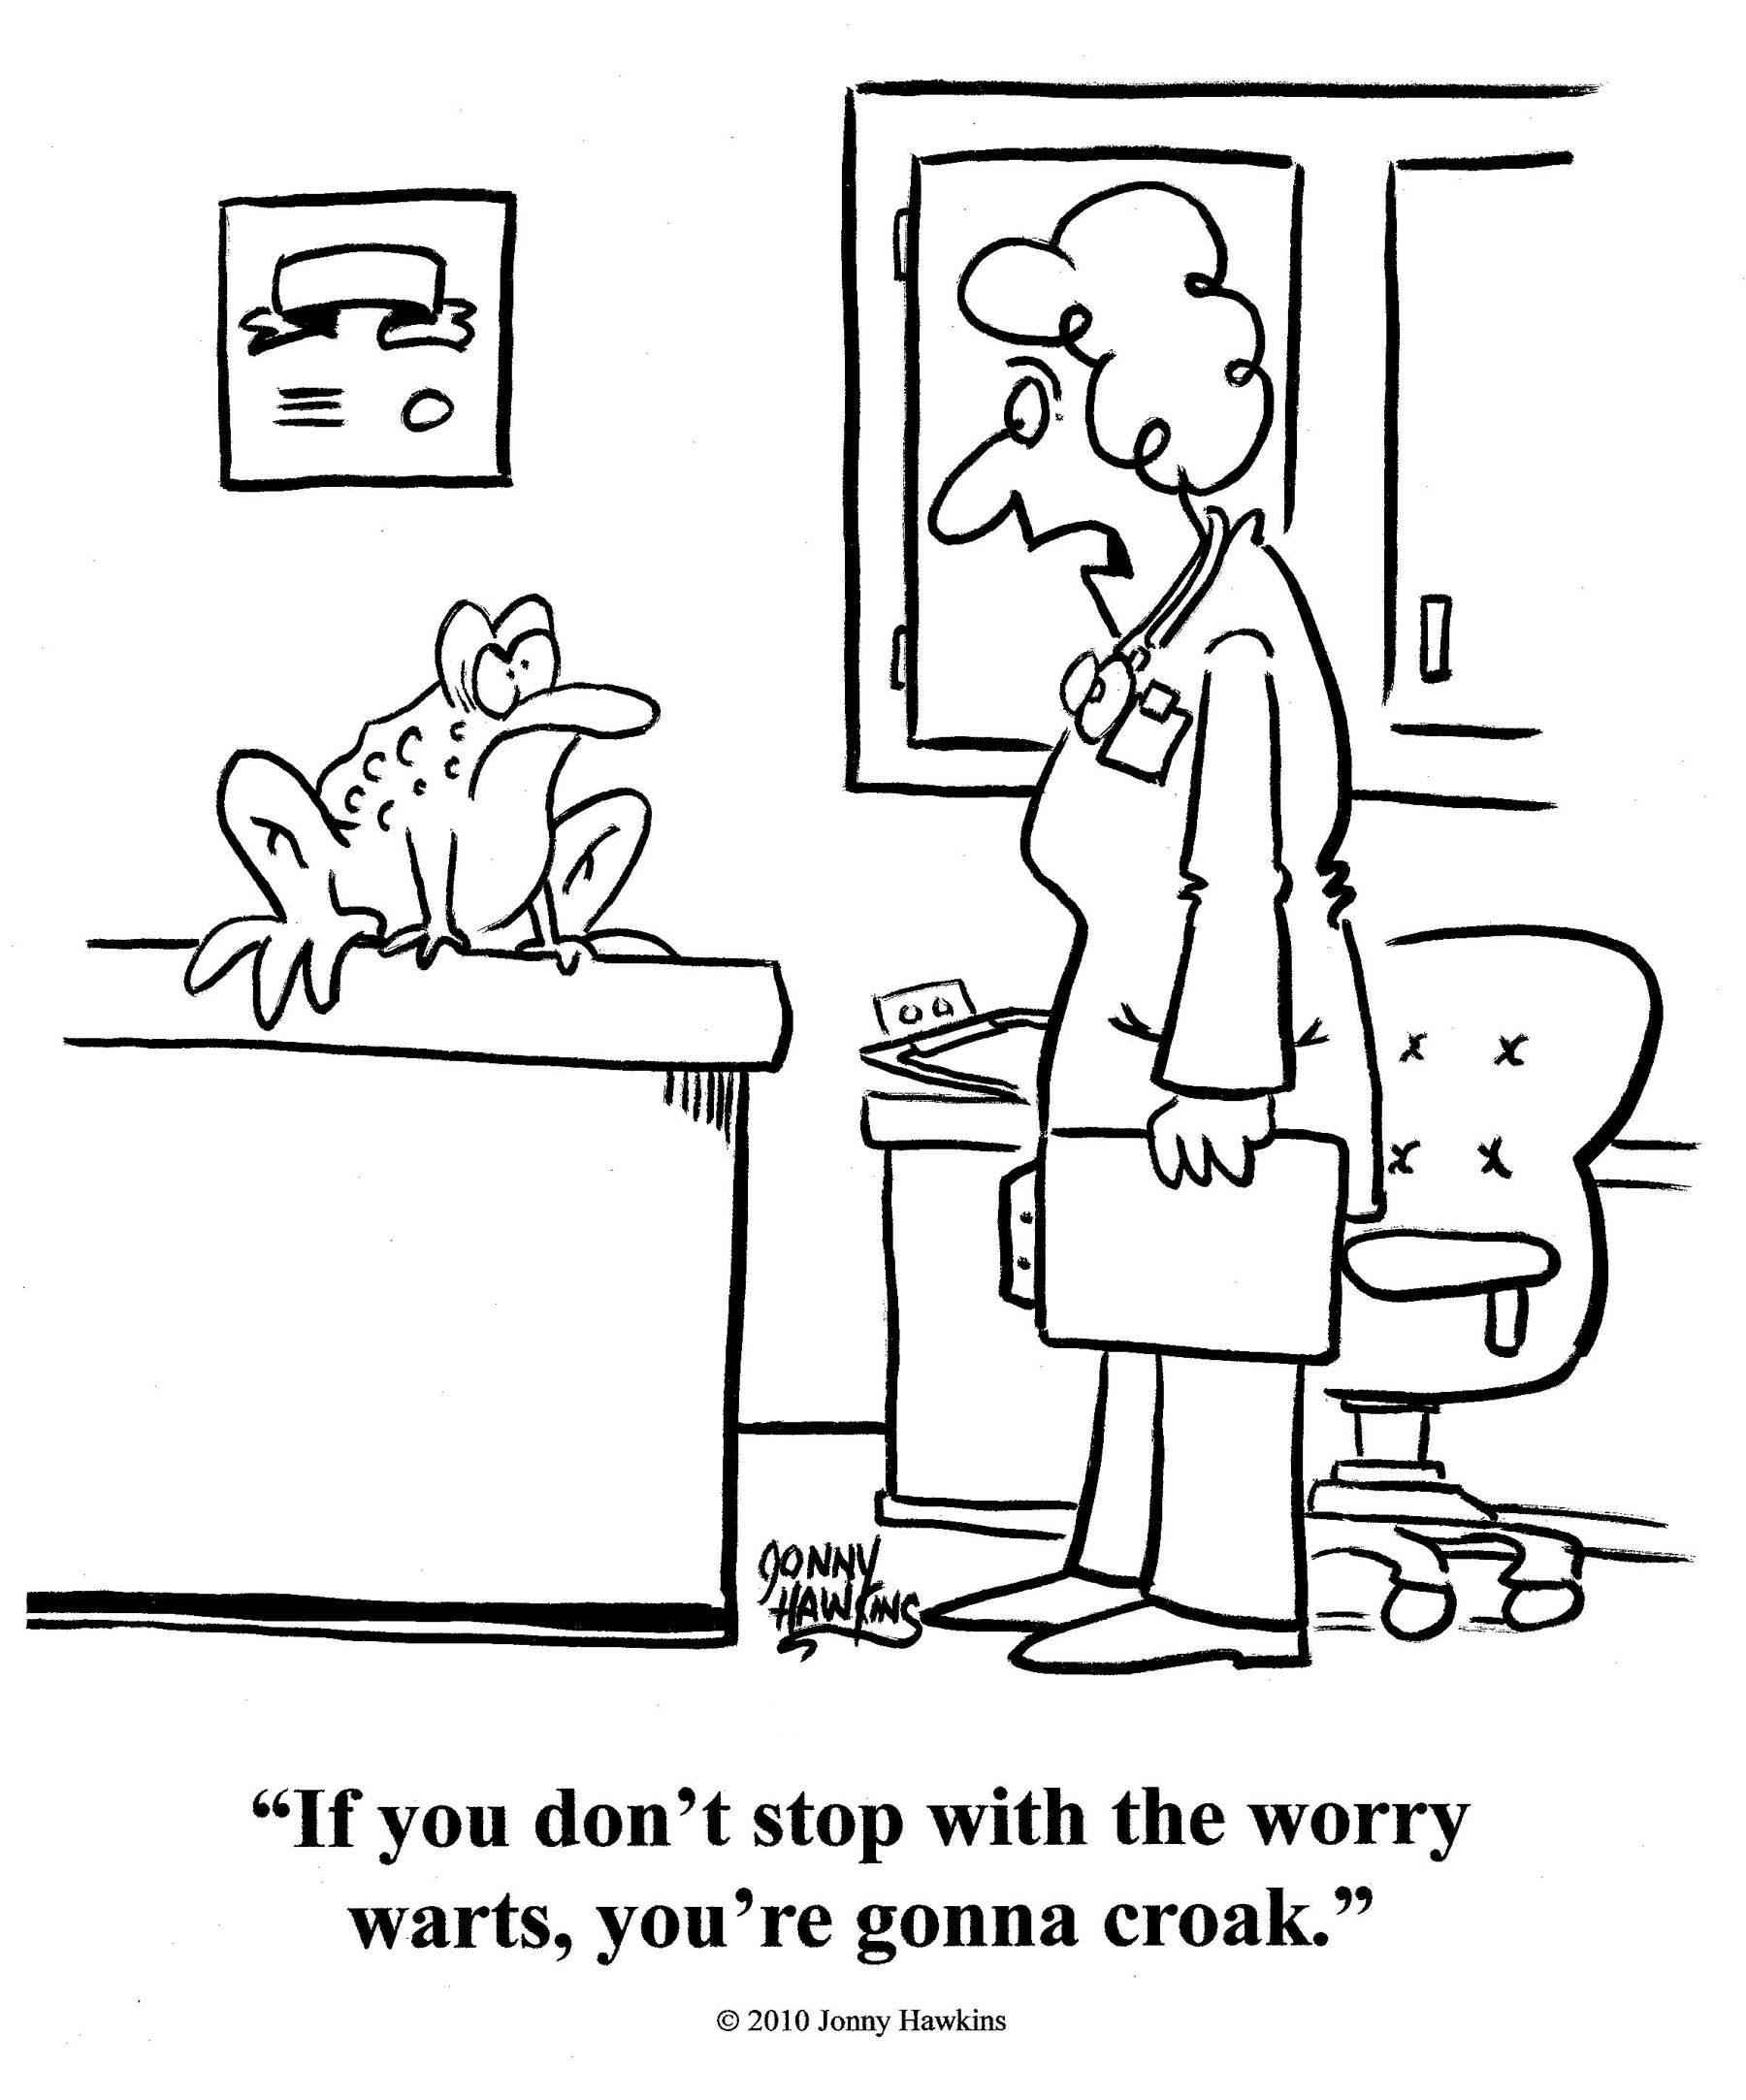 Don't be such a worry wart!